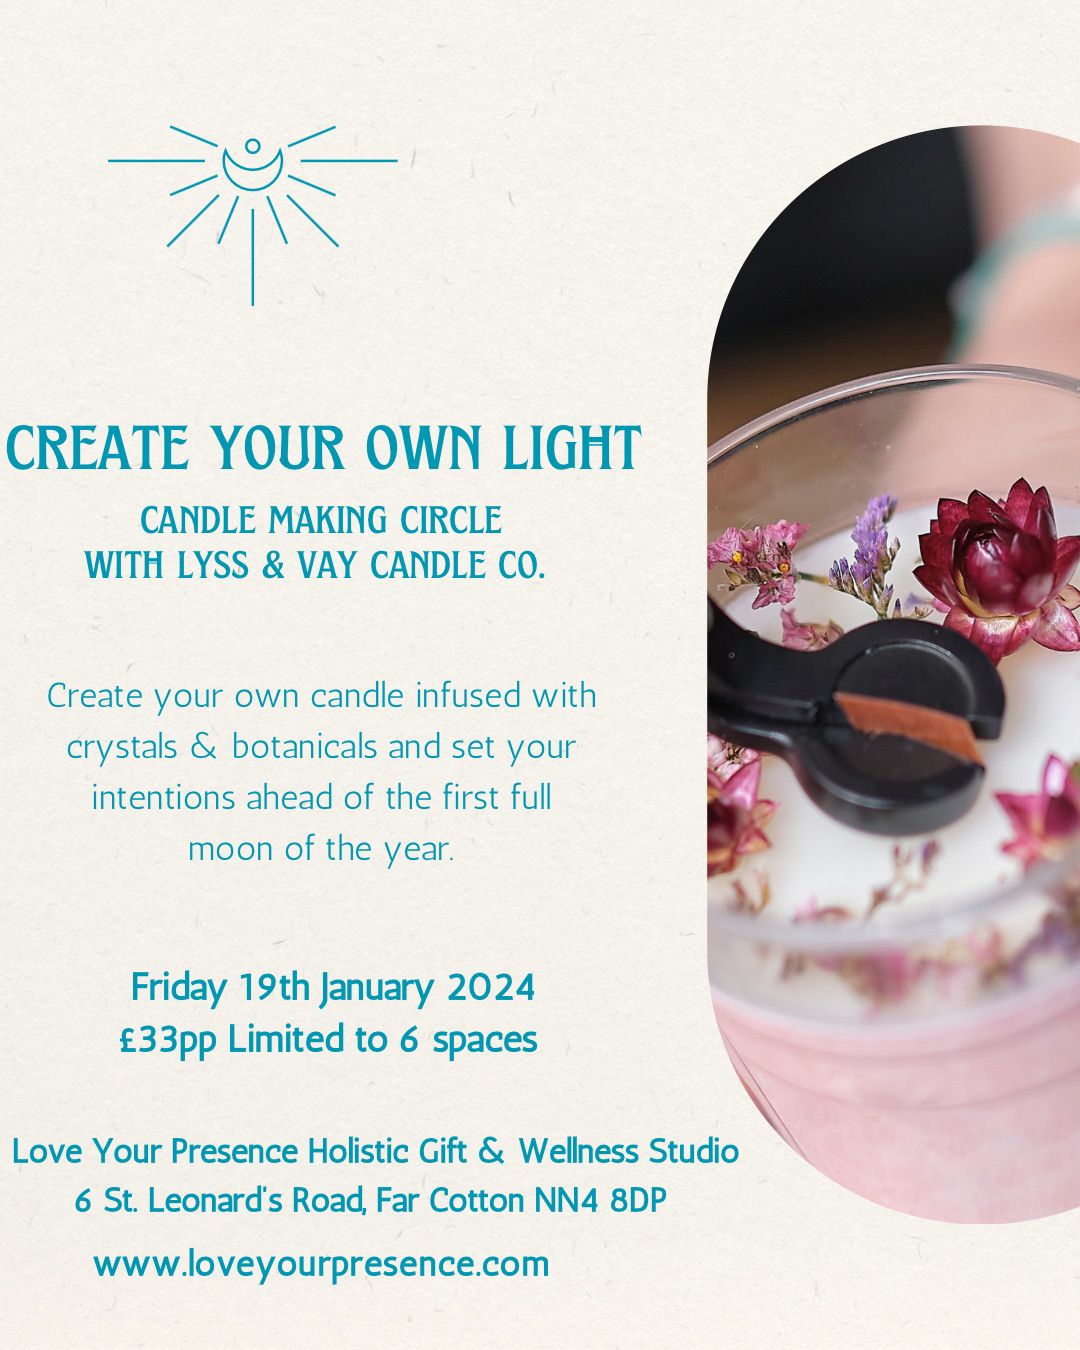 CREATE YOUR OWN LIGHT – MAKE YOUR OWN CANDLE | Northamptonshire Chamber of Commerce